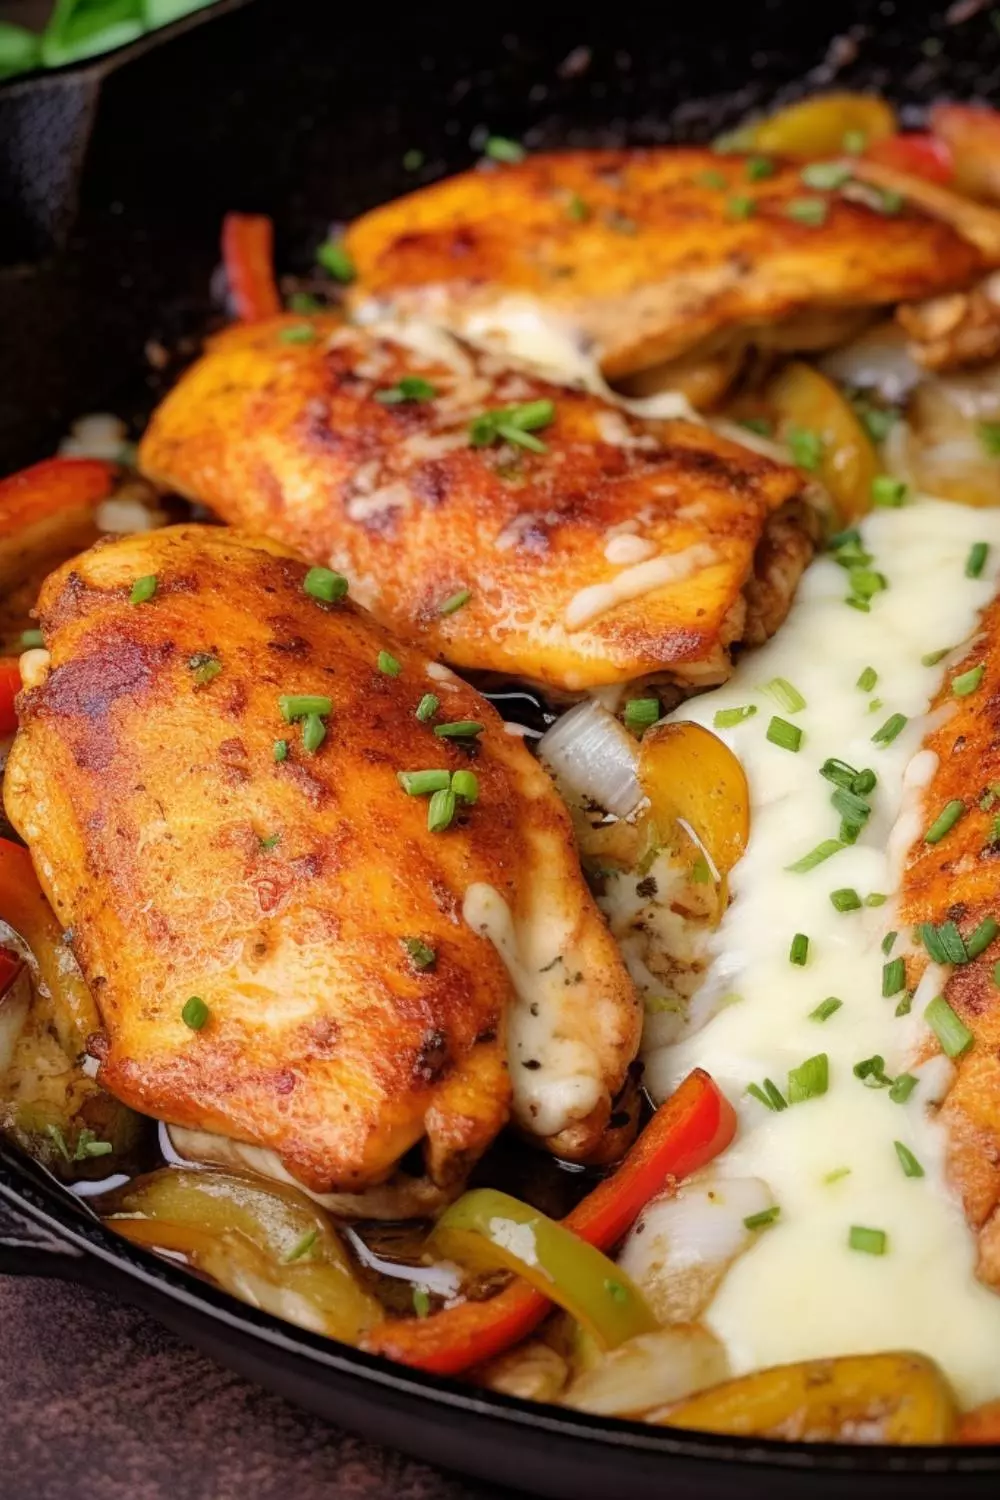 Sizzling Chicken and Cheese